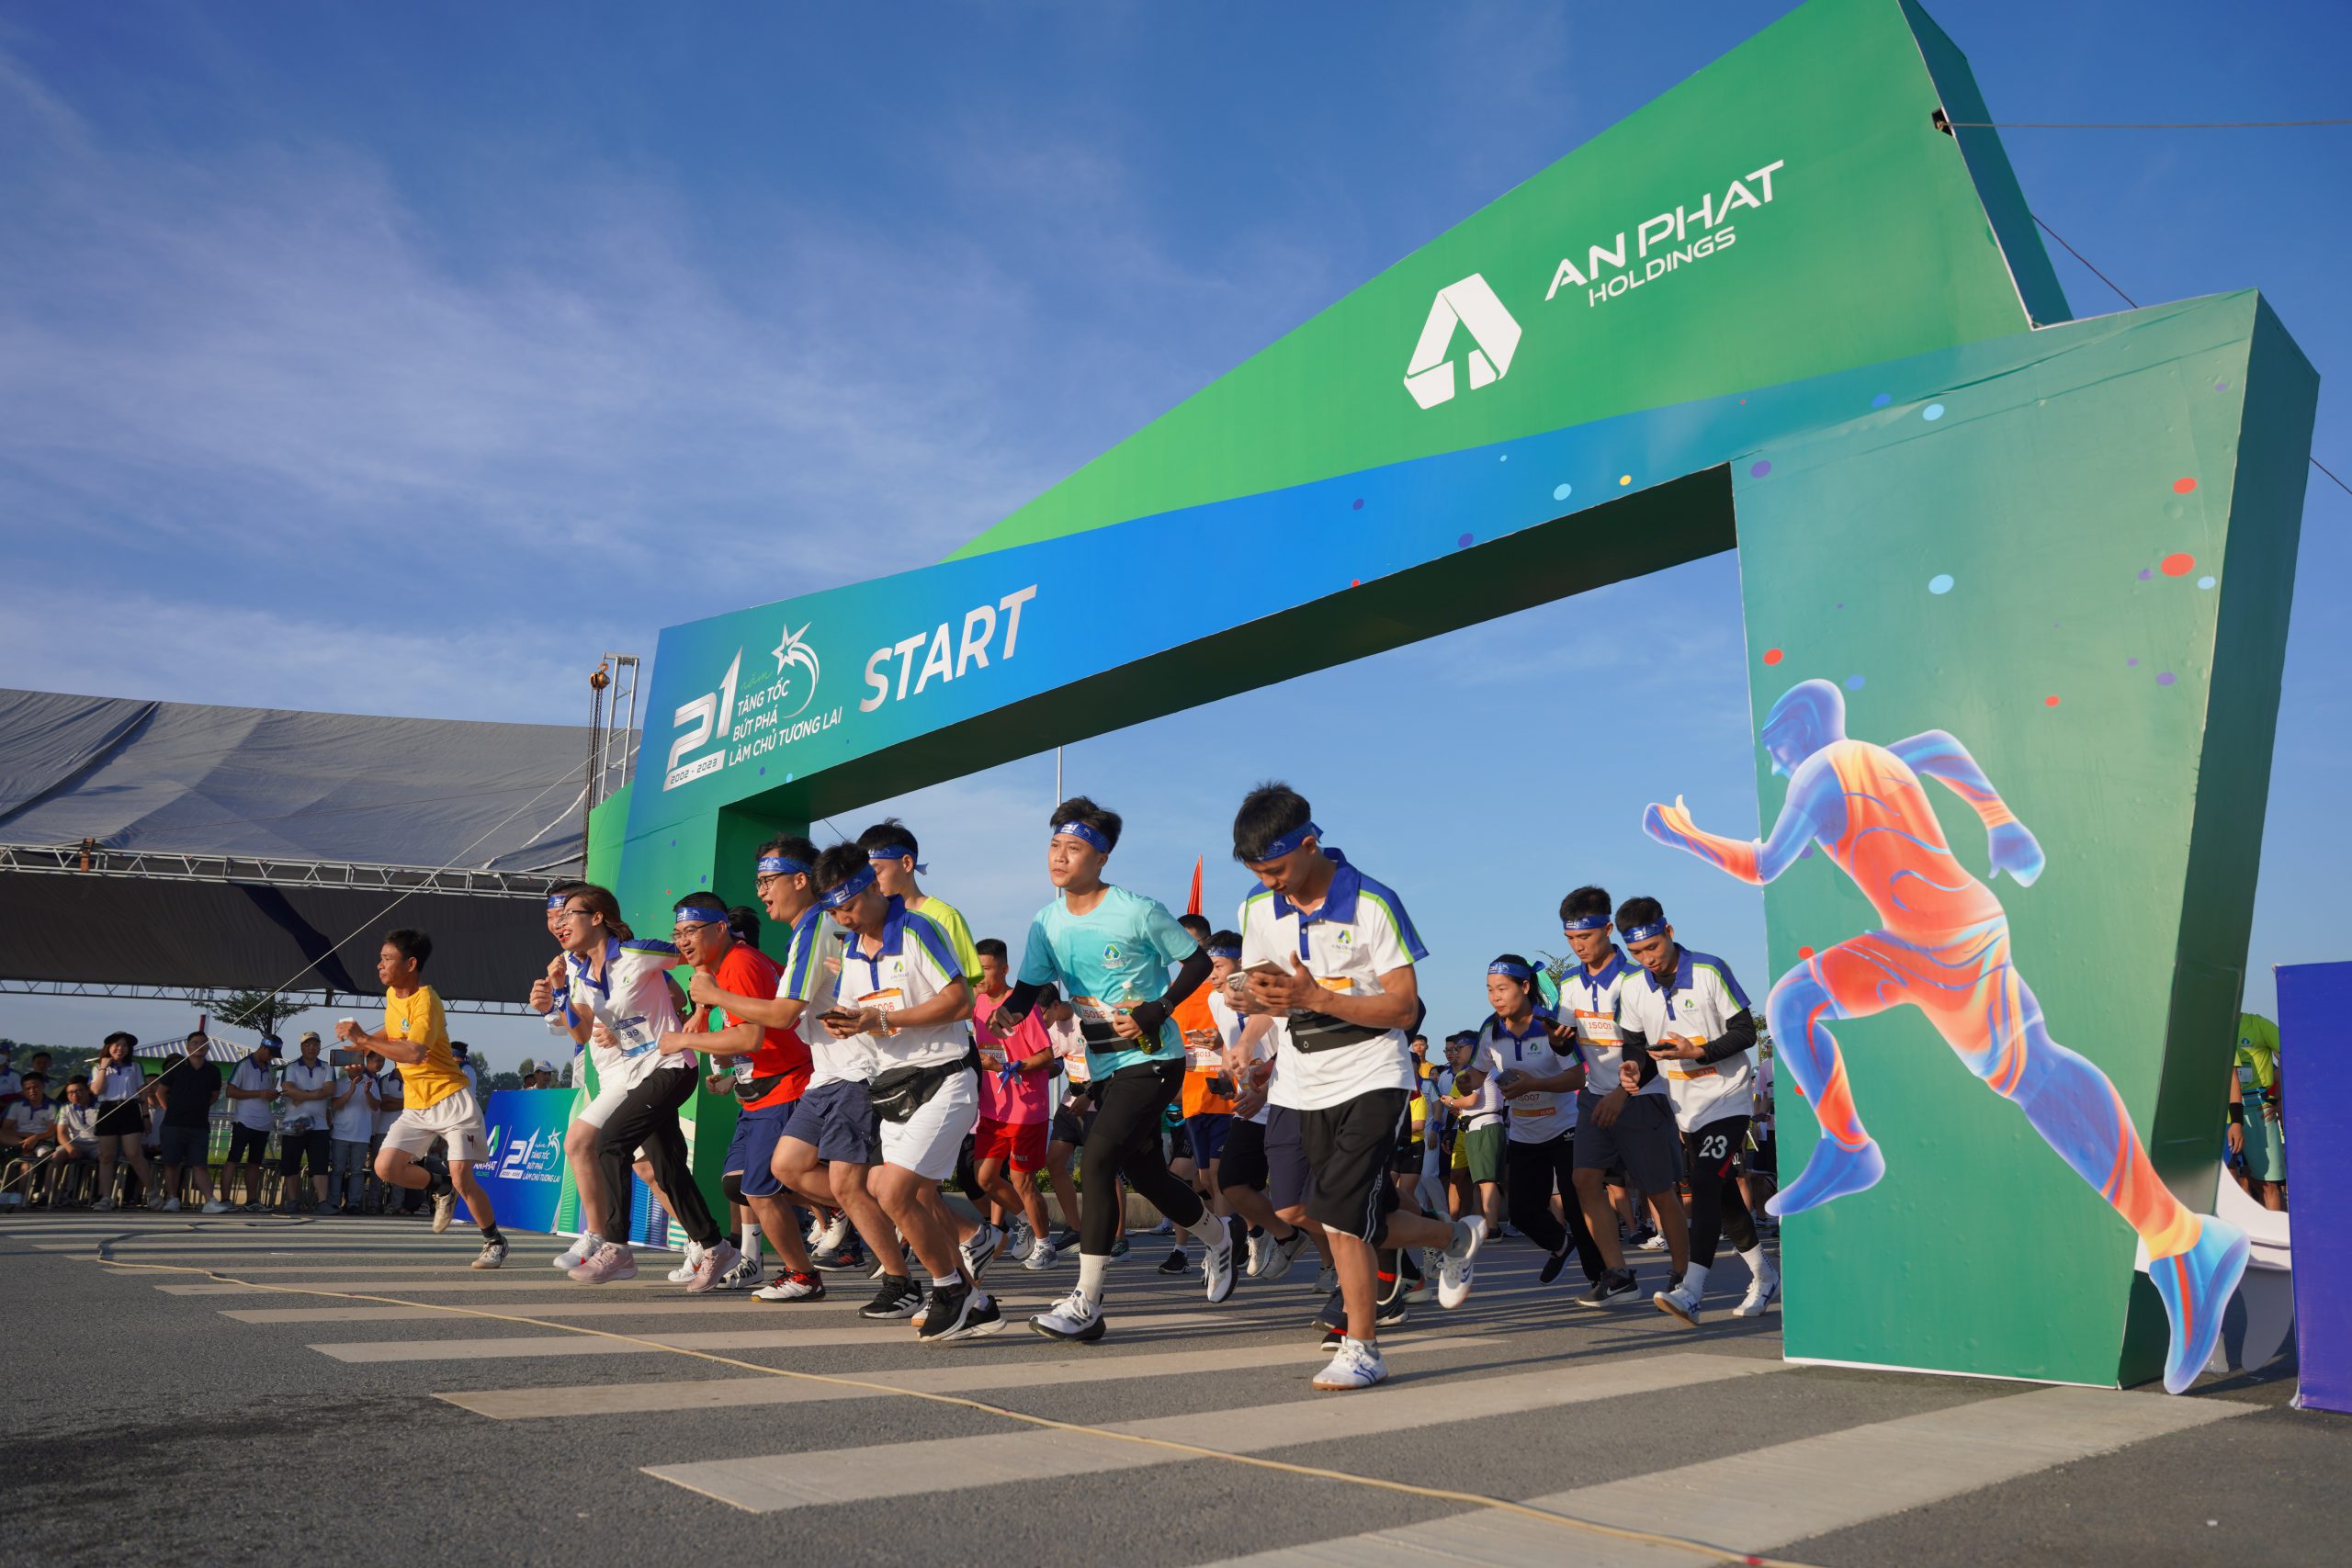 61,000 kilometers, 1,500 runners attending the race to celebrate An Phat Holdings’ 21st anniversary